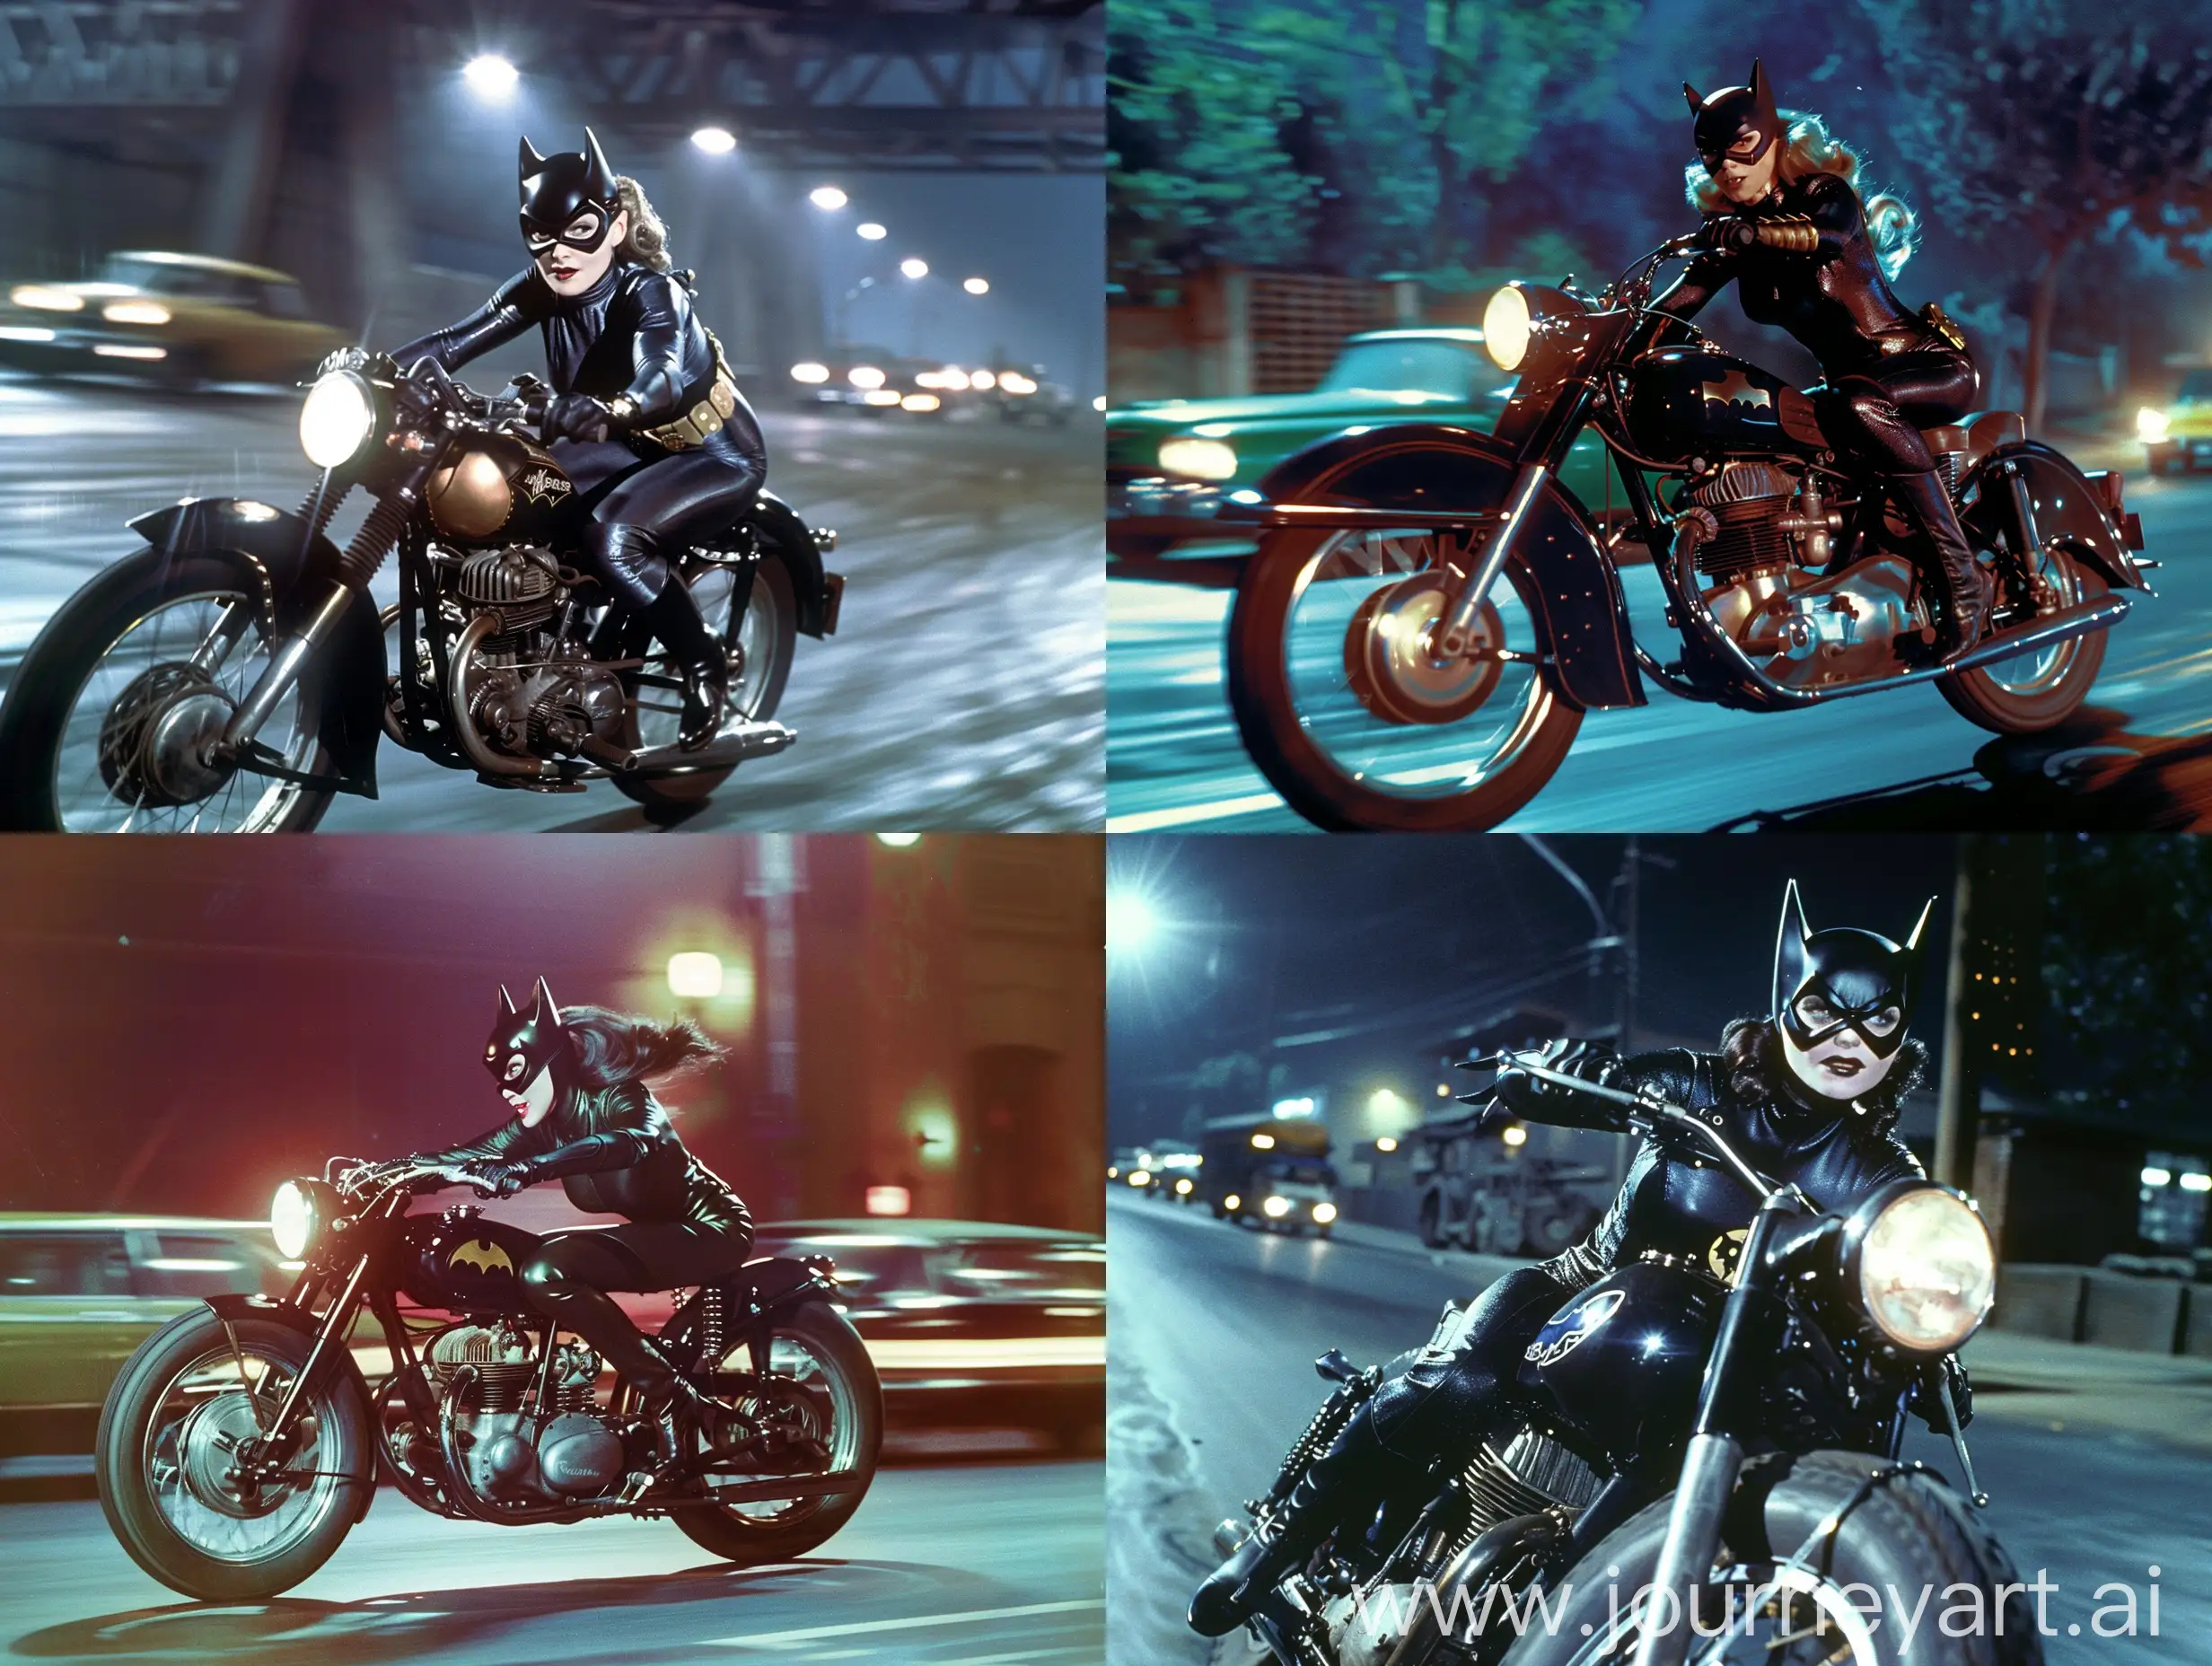 Catwoman-Riding-Motorcycle-in-1950s-Night-Scene